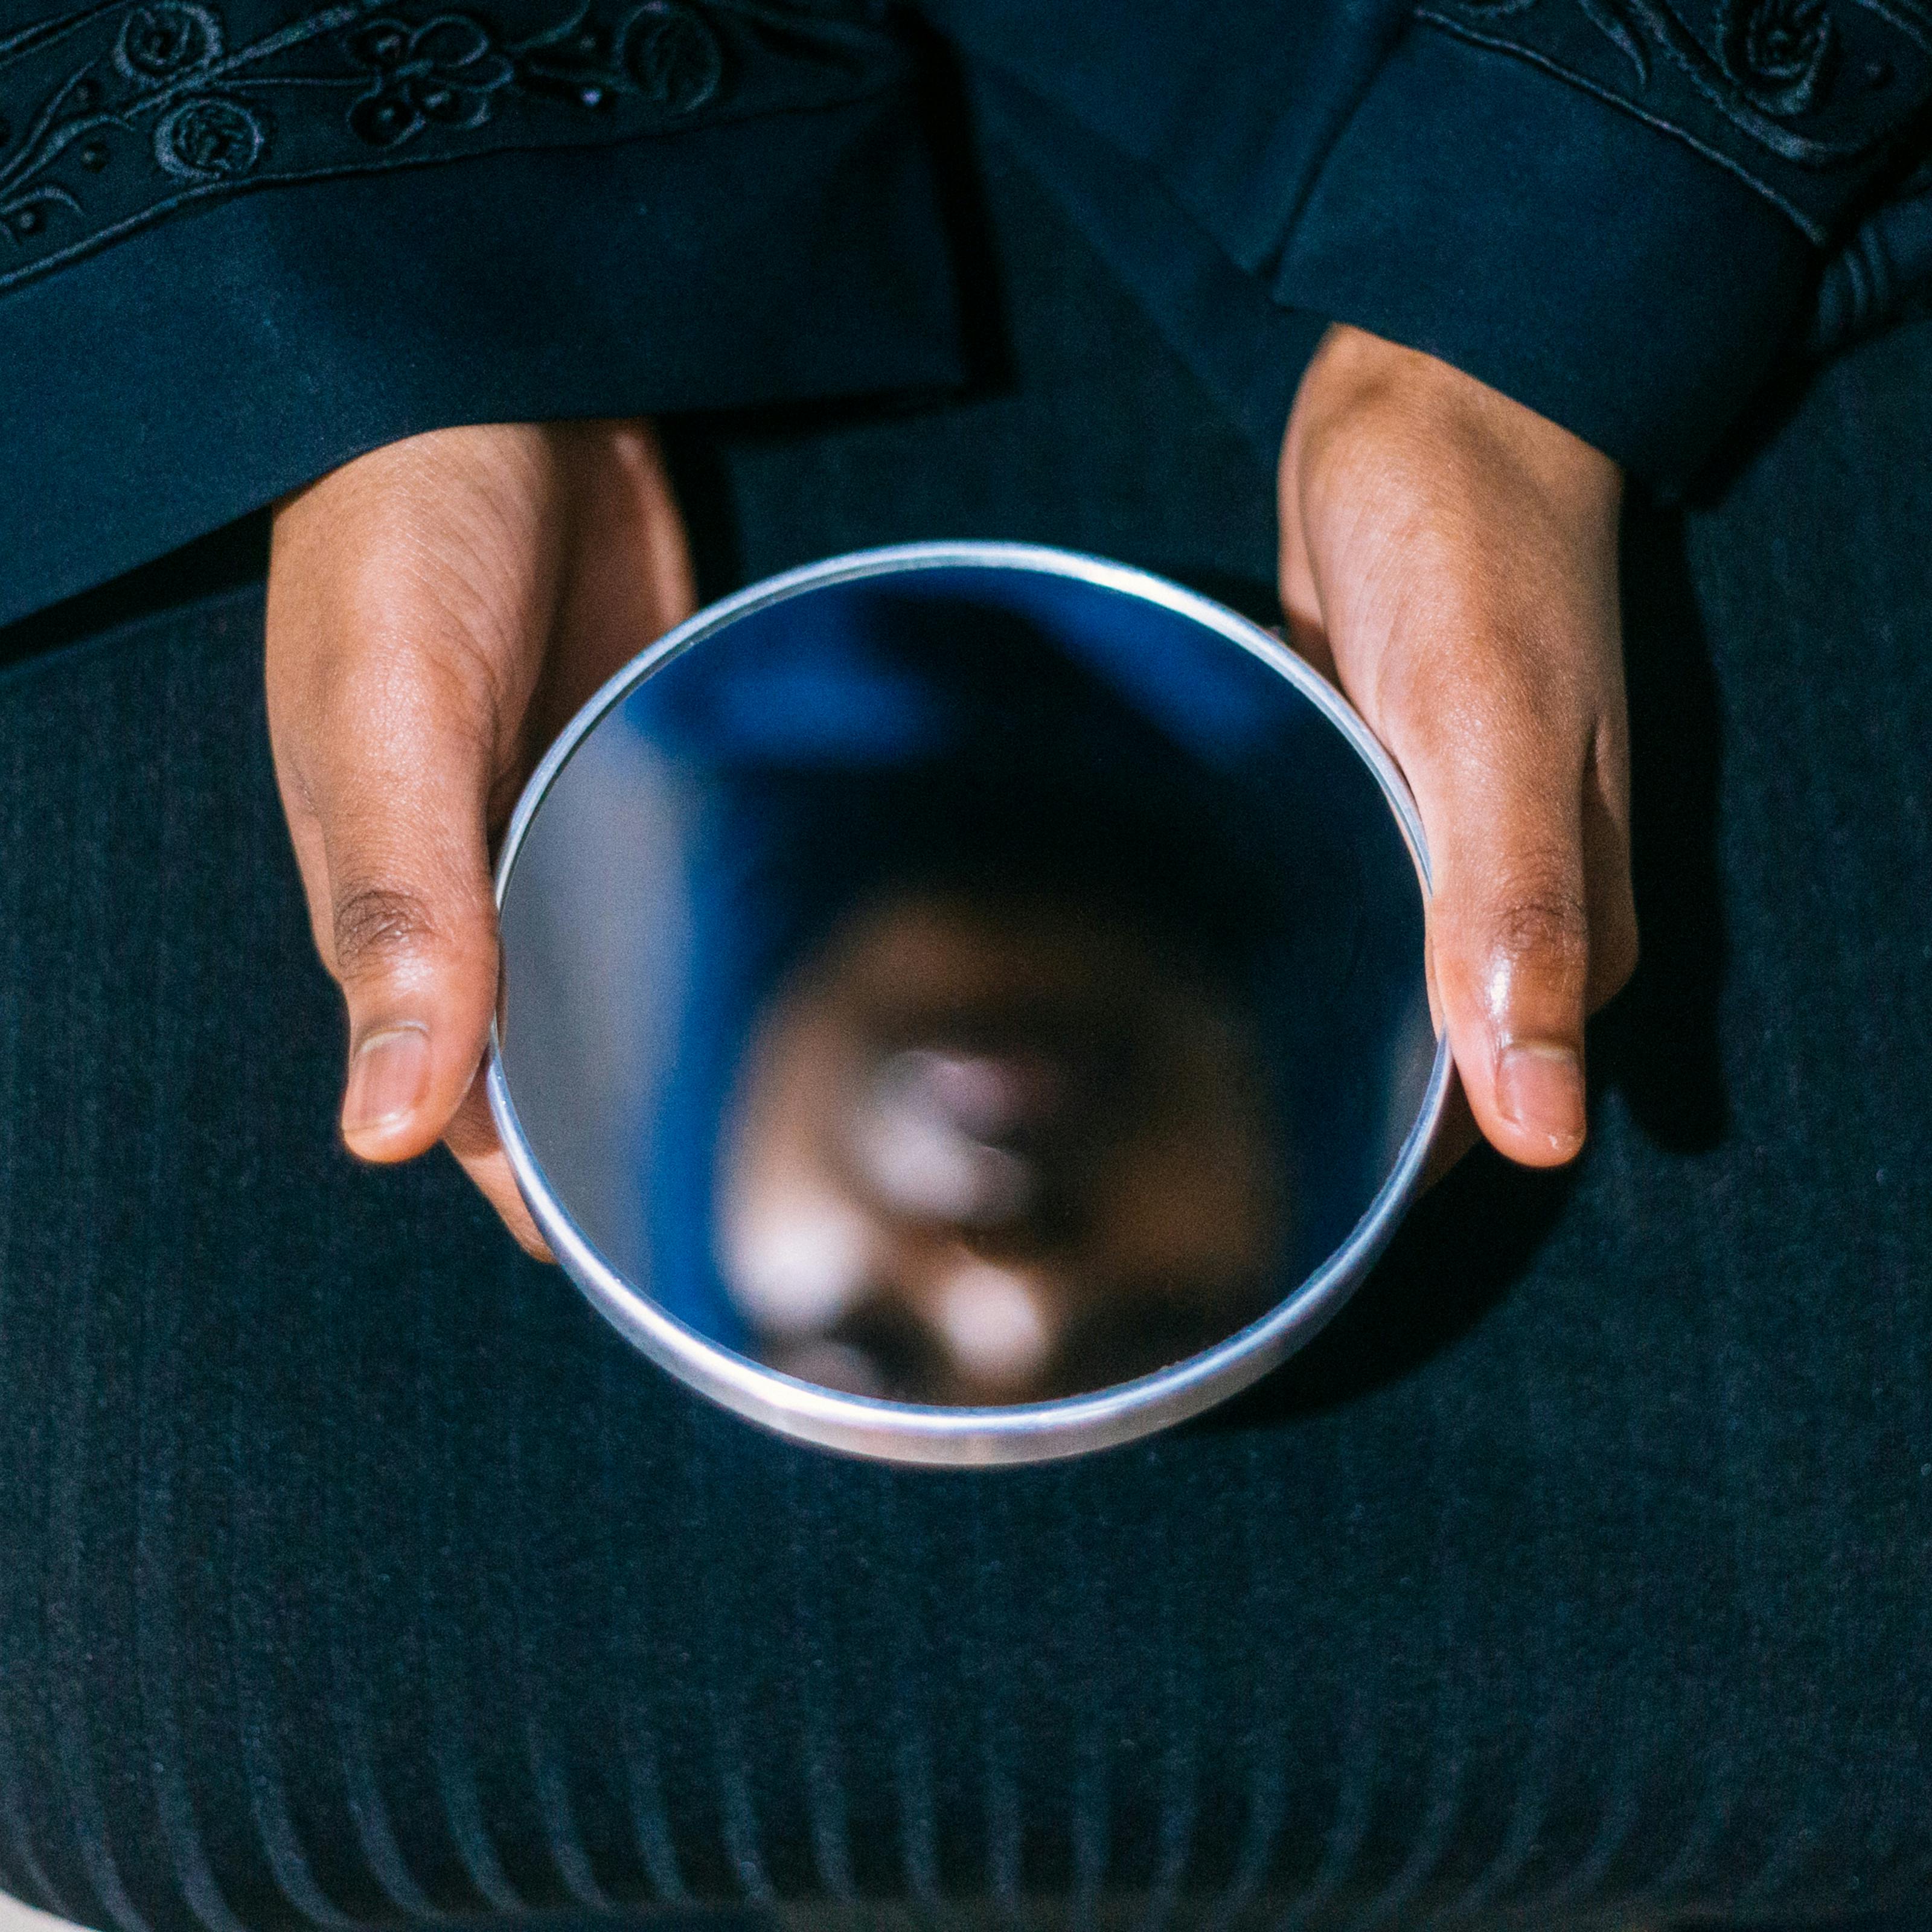 Photograph of a woman holding a circular mirror on her lap with both hands. In the reflection you can see her face, out of focus.